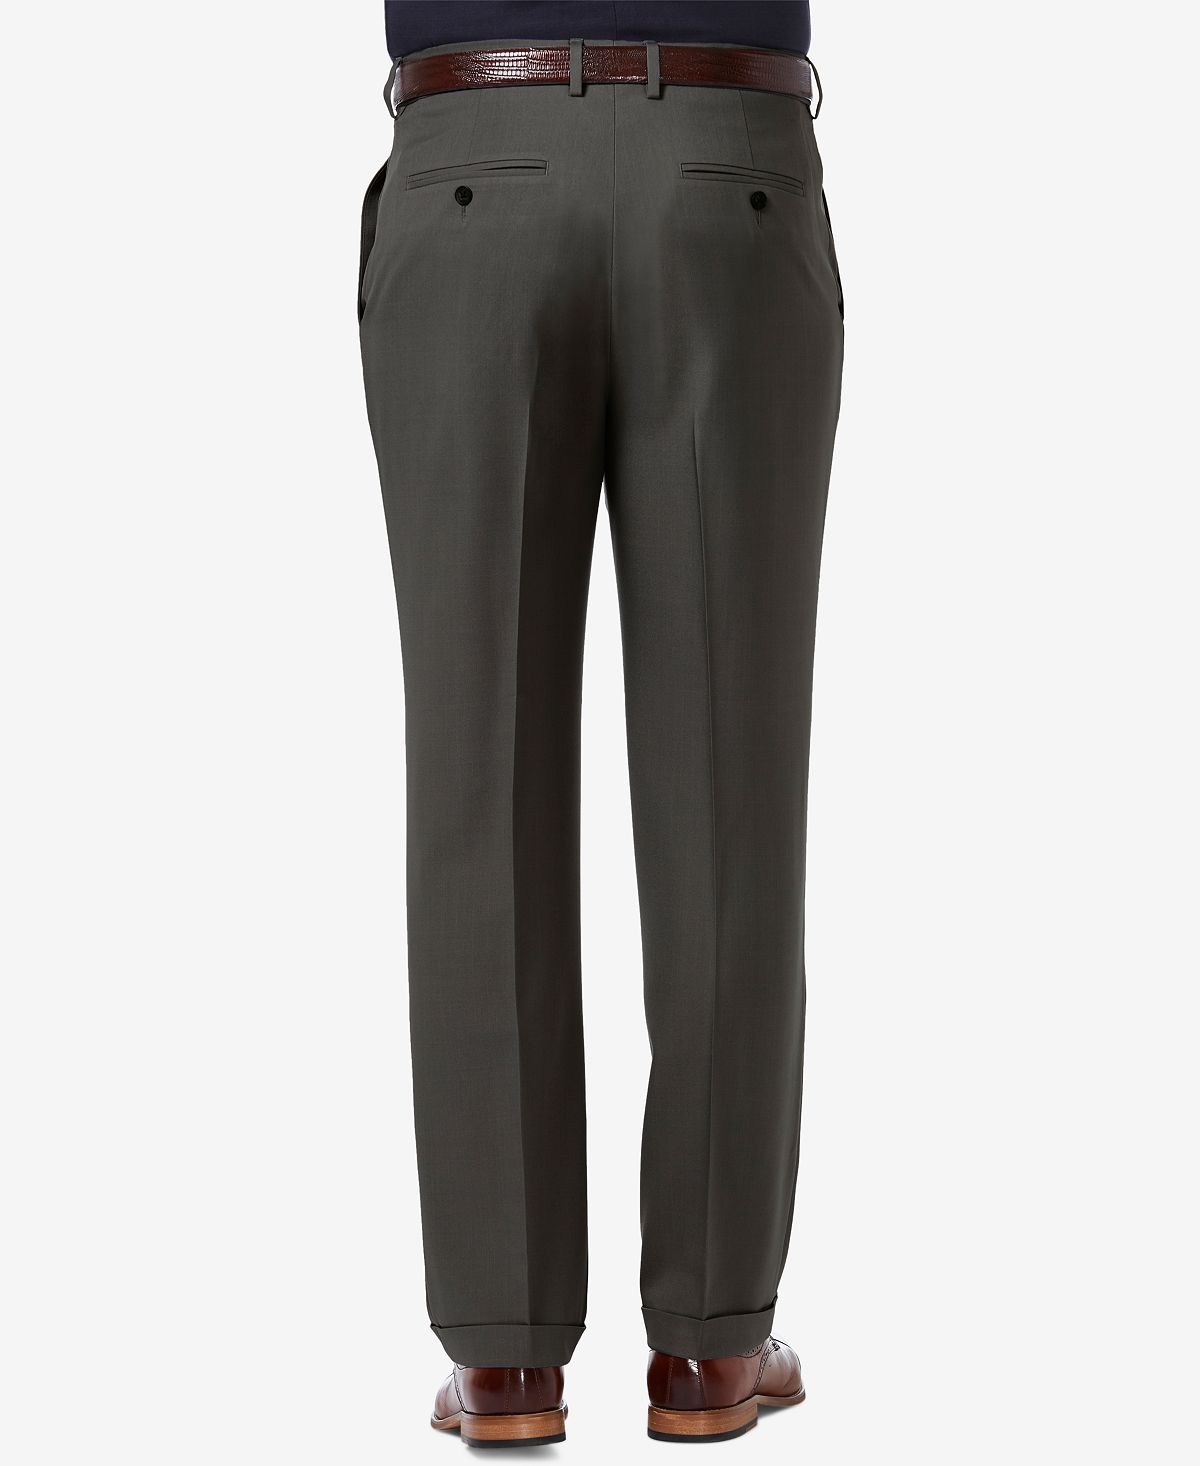 Haggar Premium Comfort Stretch Classic-fit Solid Pleated Dress Pants Charcoal